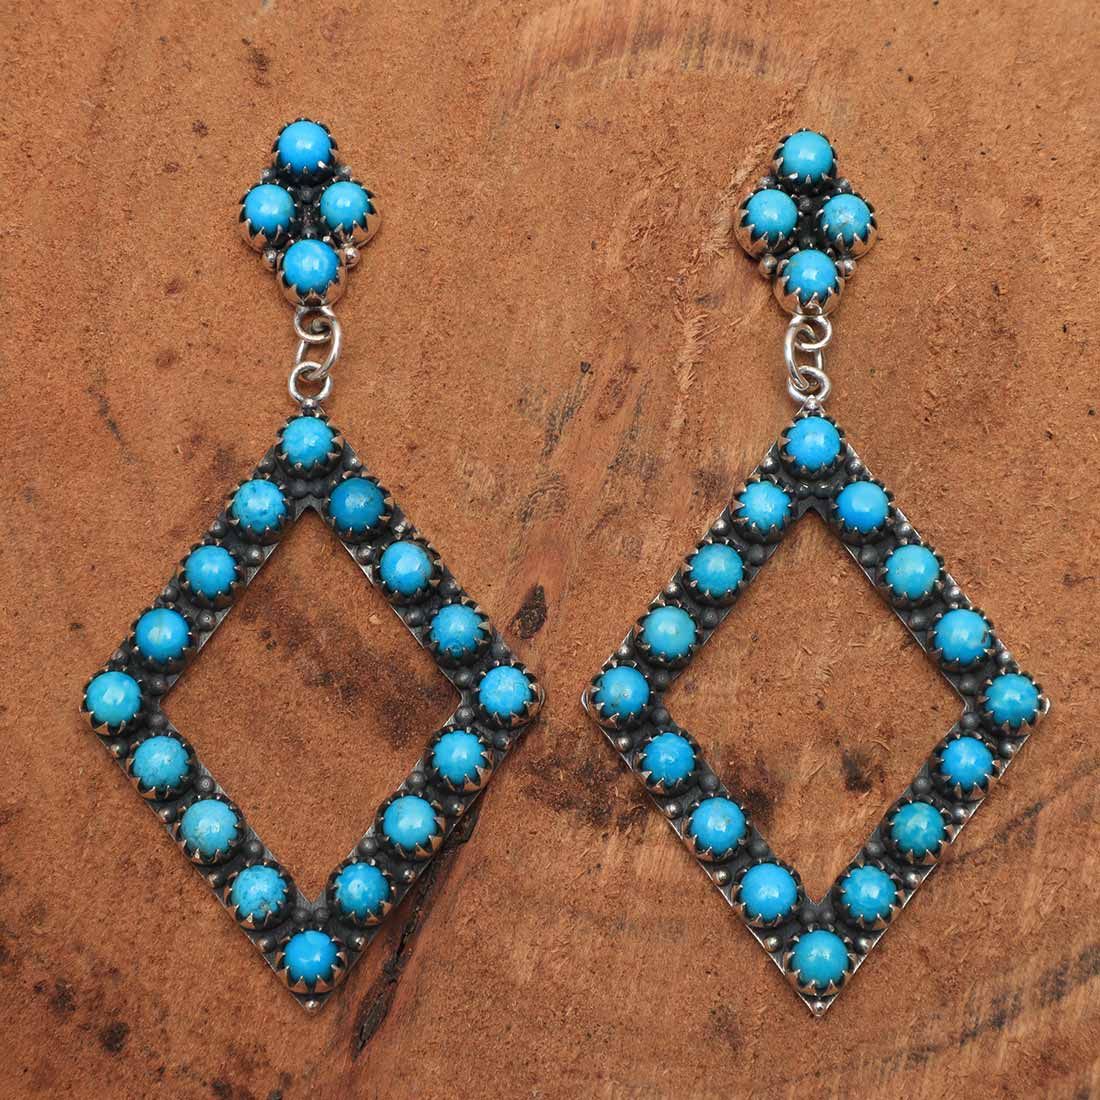 Let's Indulge Your Beauty With Turquoise Jewelry